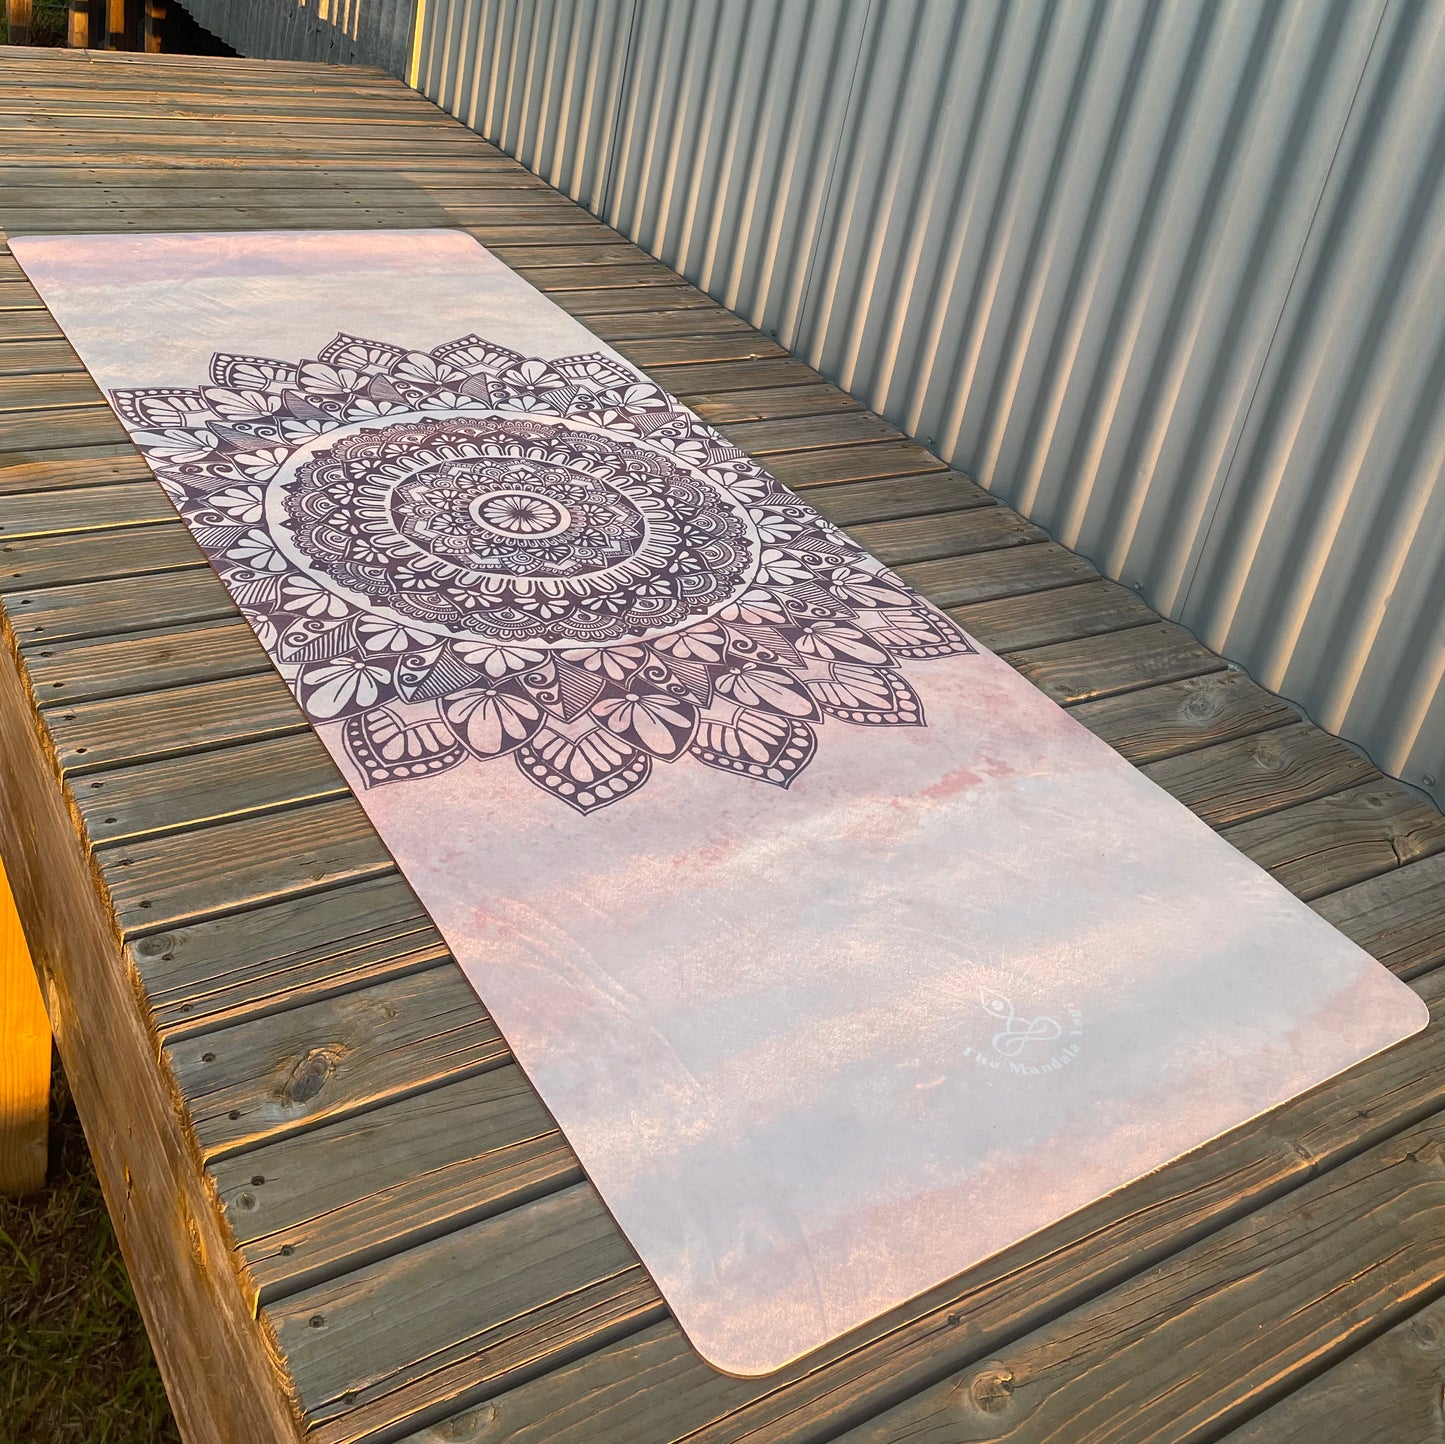 Resilience eco-friendly suede yoga mats